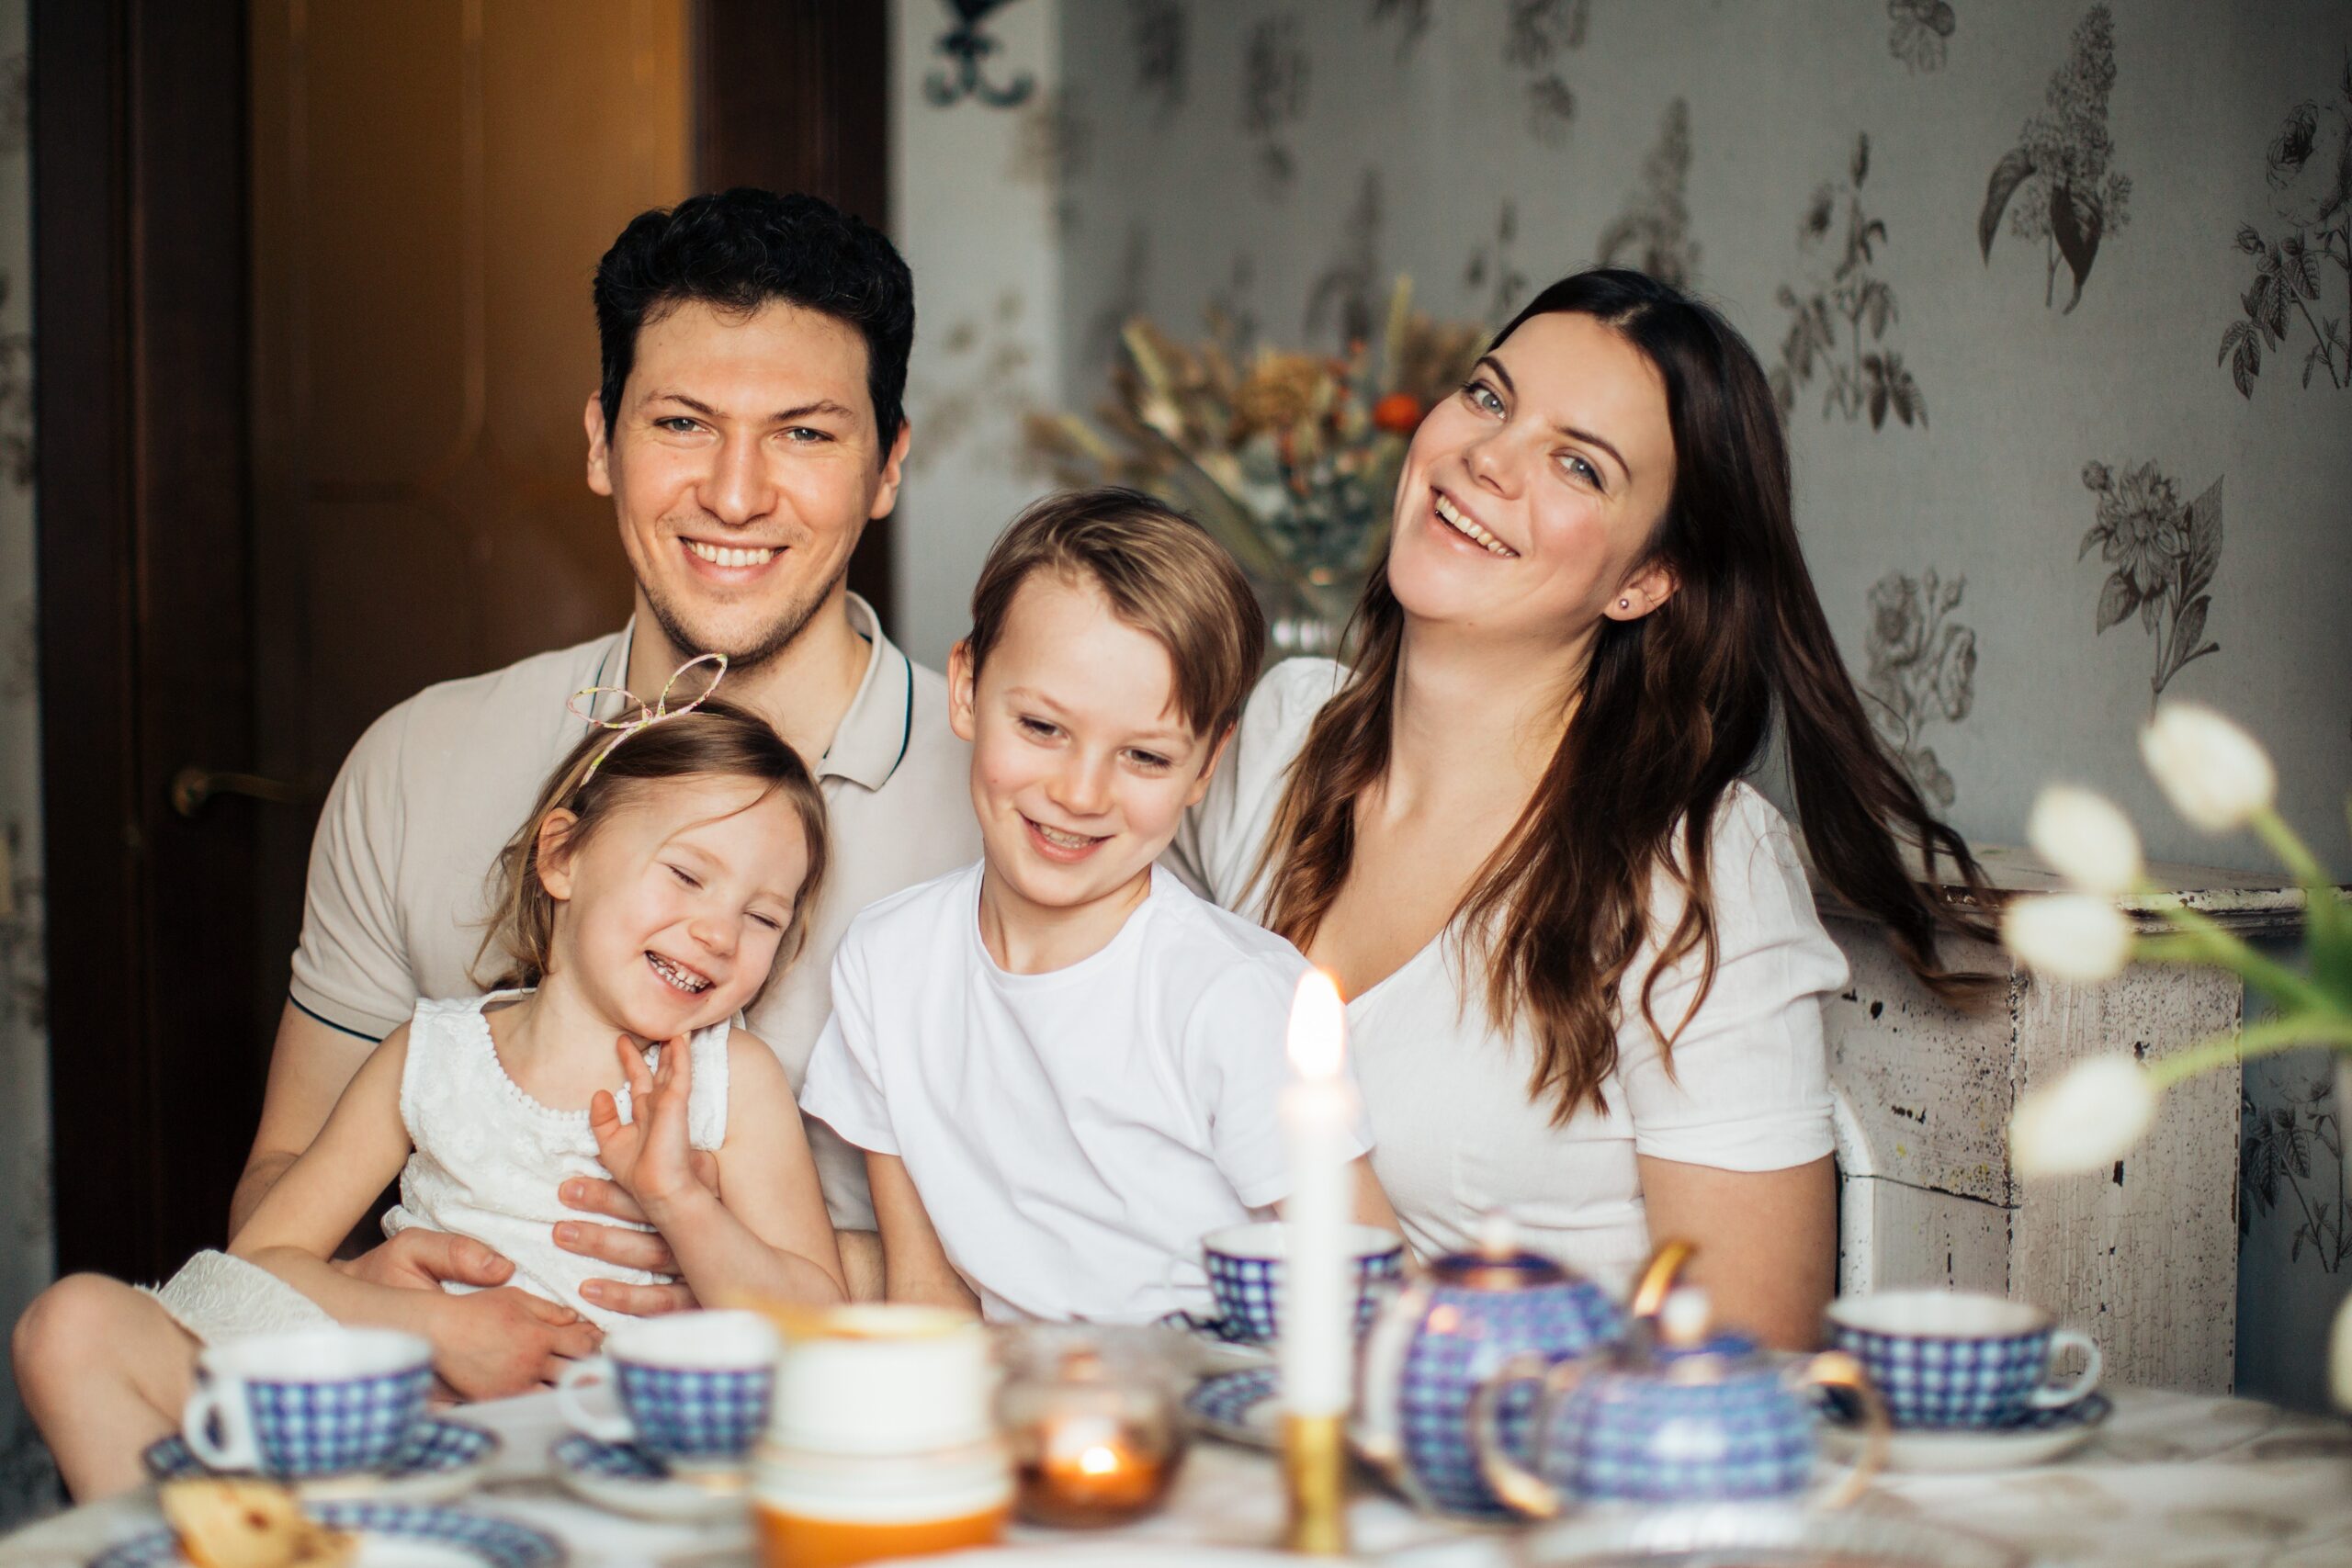 Photo by Elina Fairytale: https://www.pexels.com/photo/loving-family-laughing-at-table-having-cozy-meal-3807571/